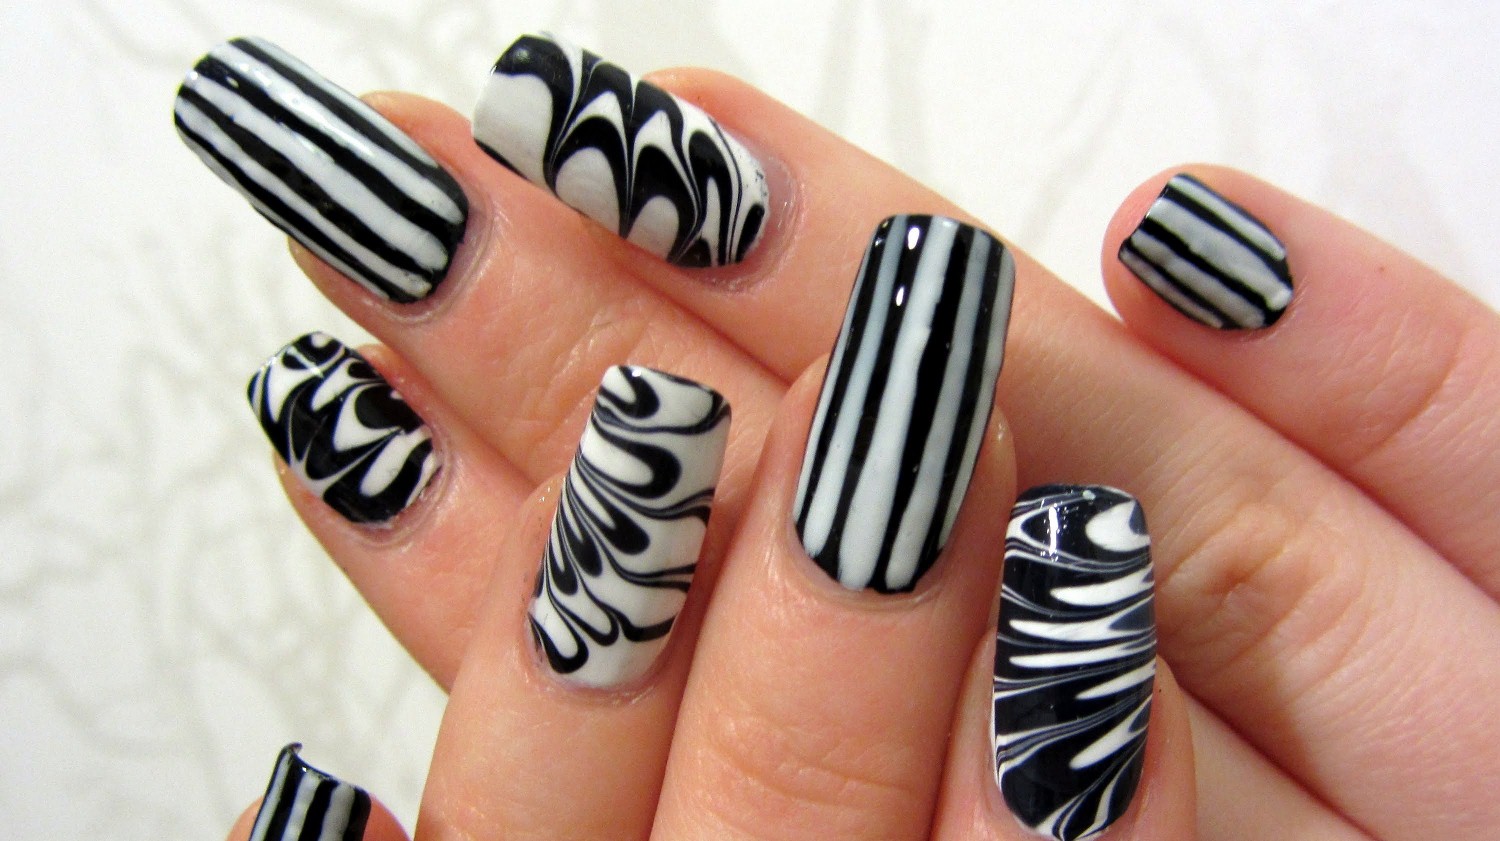 8. Striped Anchor Nail Art Inspiration - wide 8